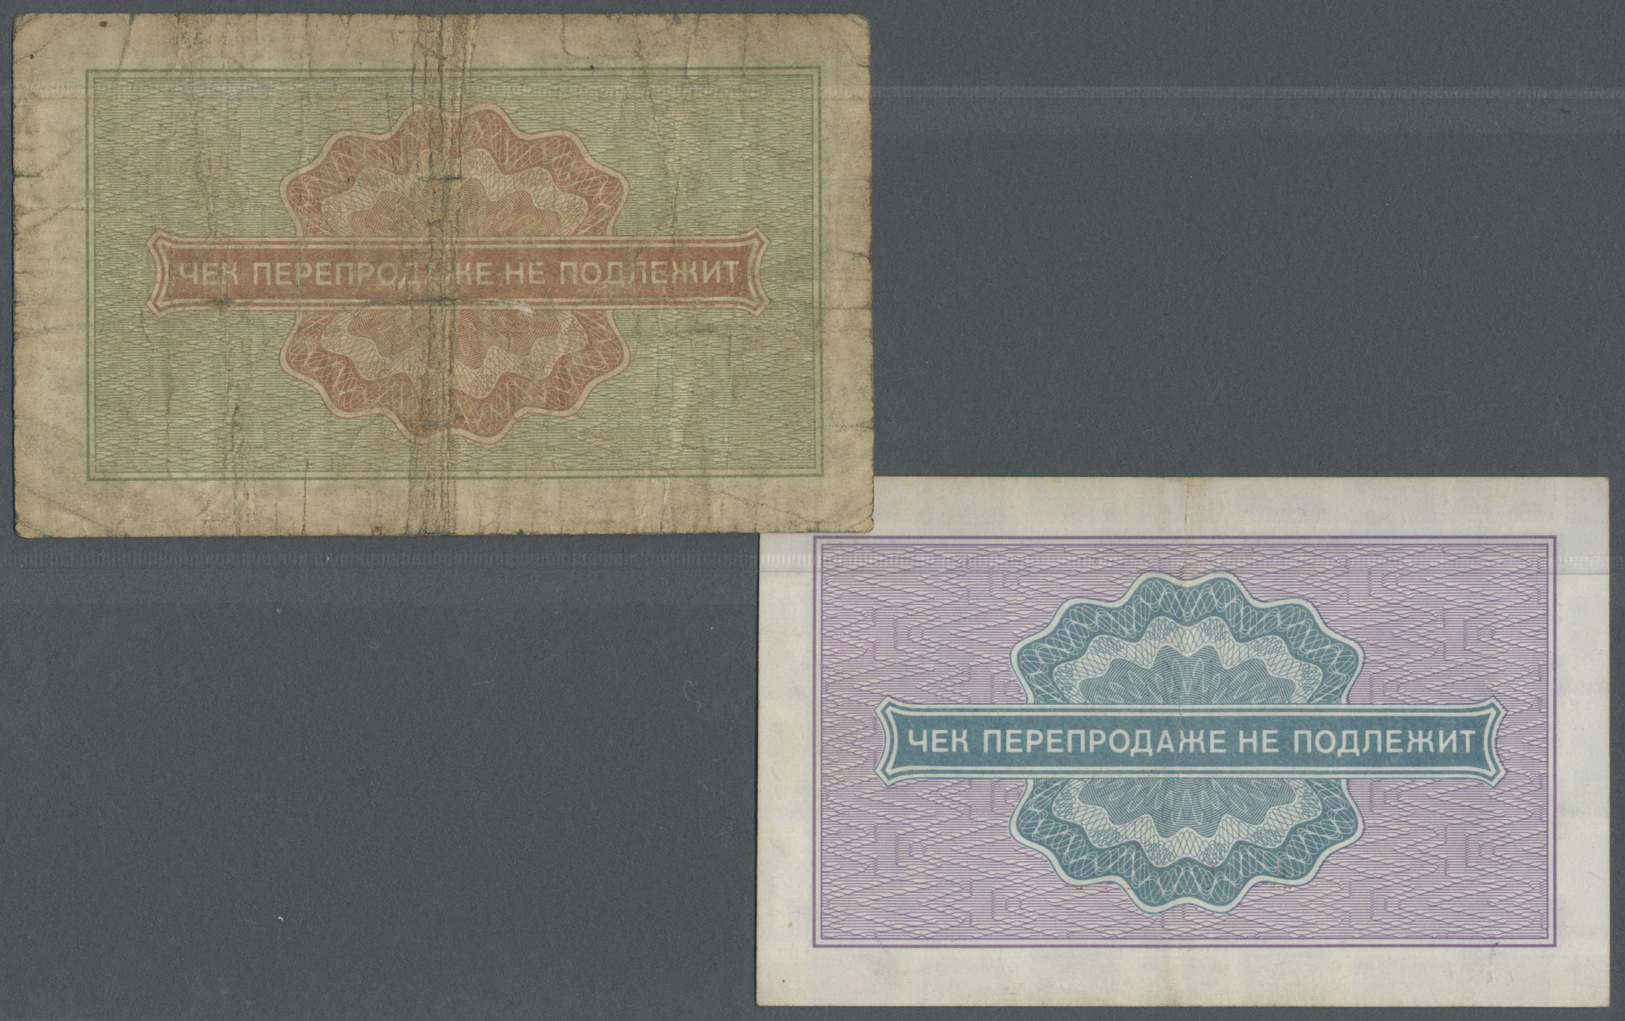 02236 Russia / Russland: Vneshposyltorg  -  Foreign Exchange Certificates  -  Check Military Trade Issue, Pair With 25 A - Russia